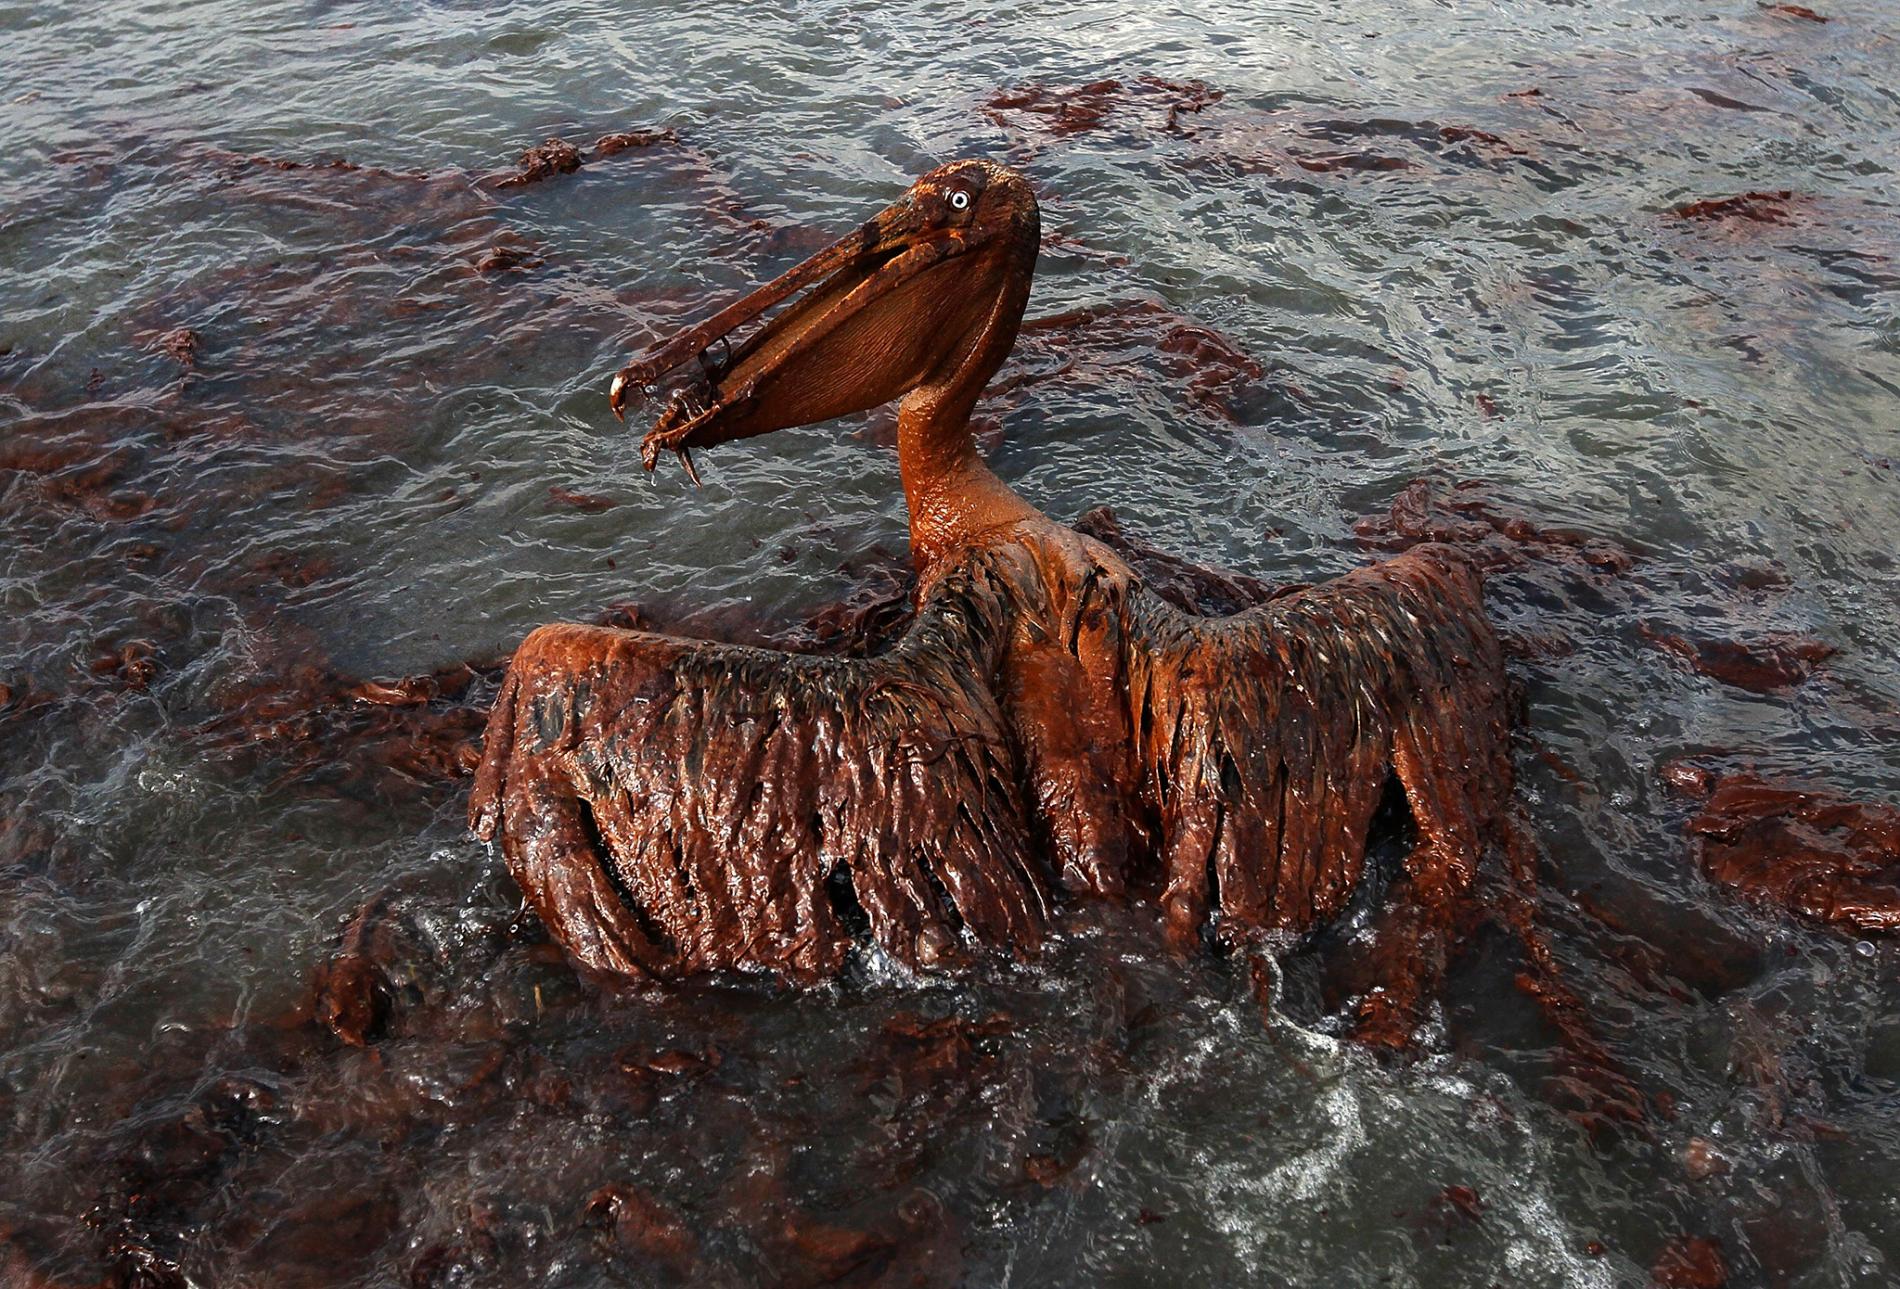 Ten years later, BP oil spill continues to hurt wildlife—especially dolphins